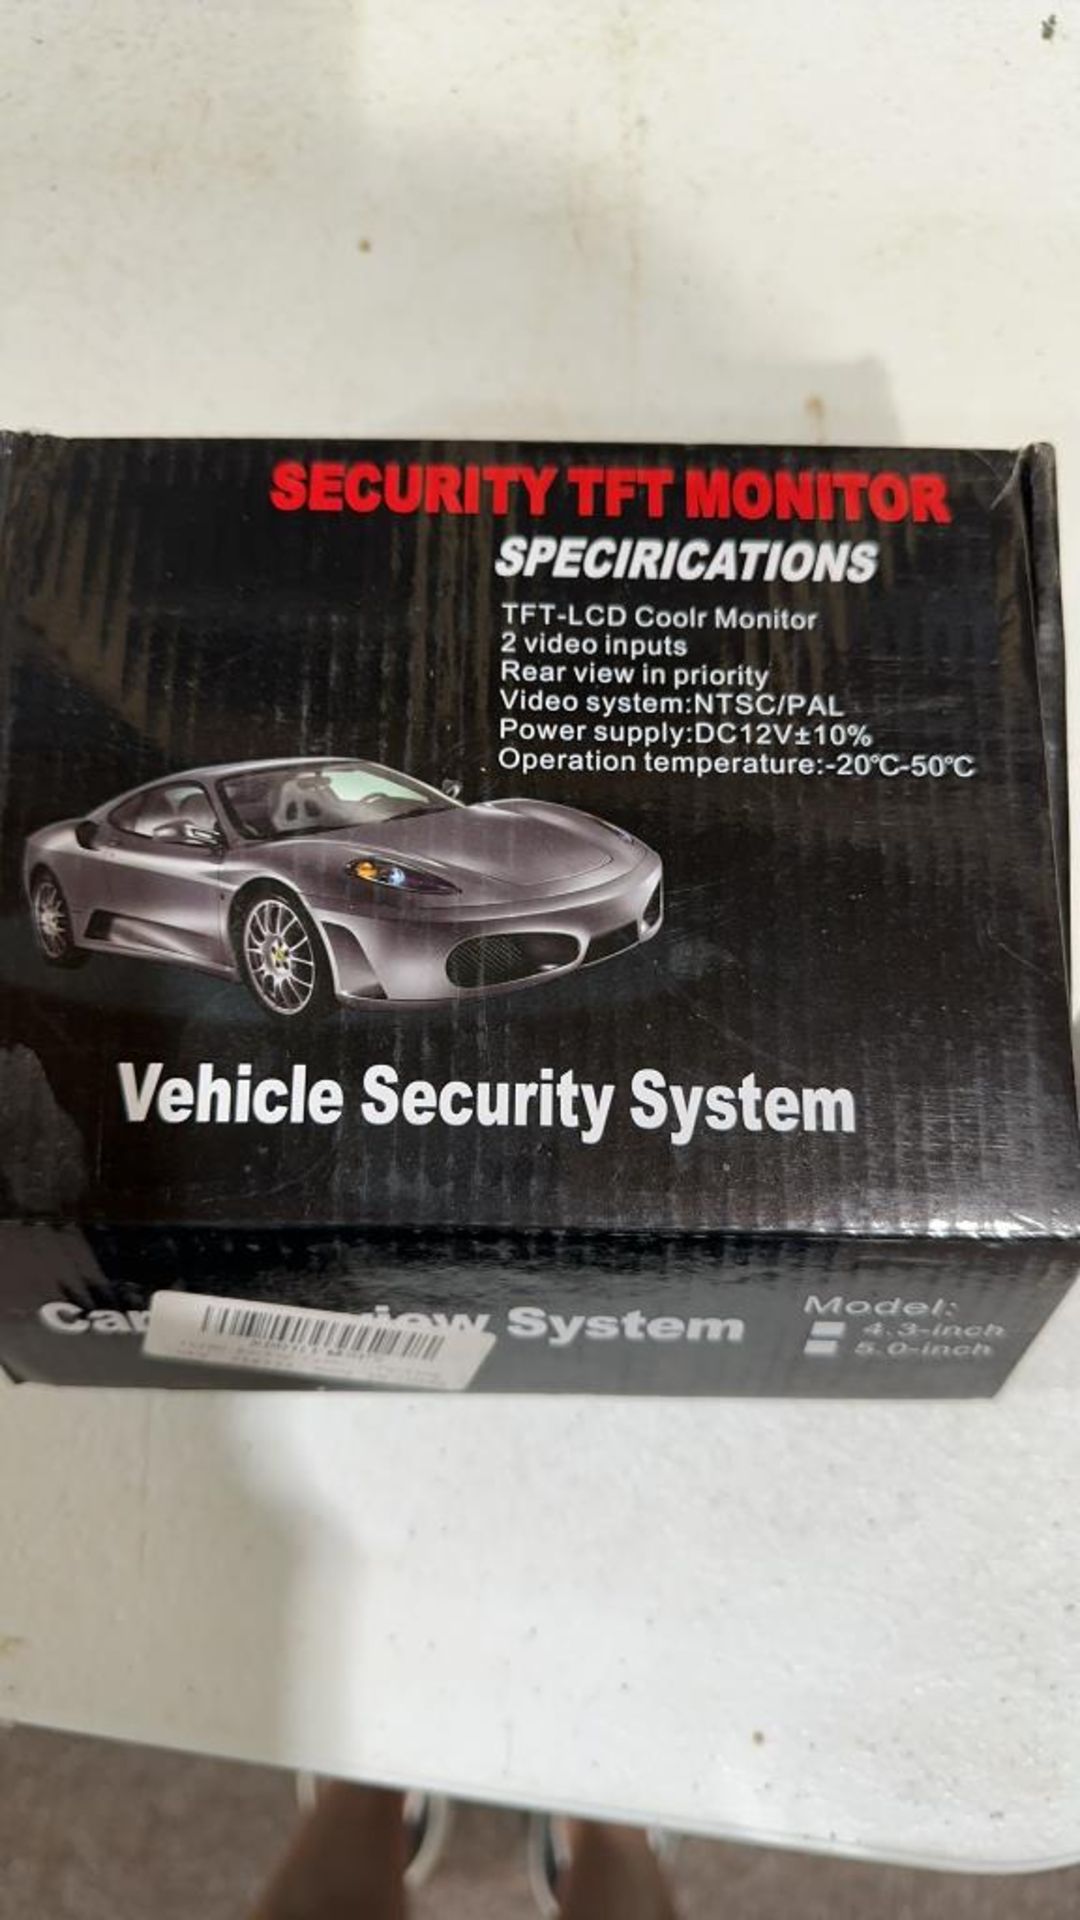 Vehicle security system - Image 2 of 9